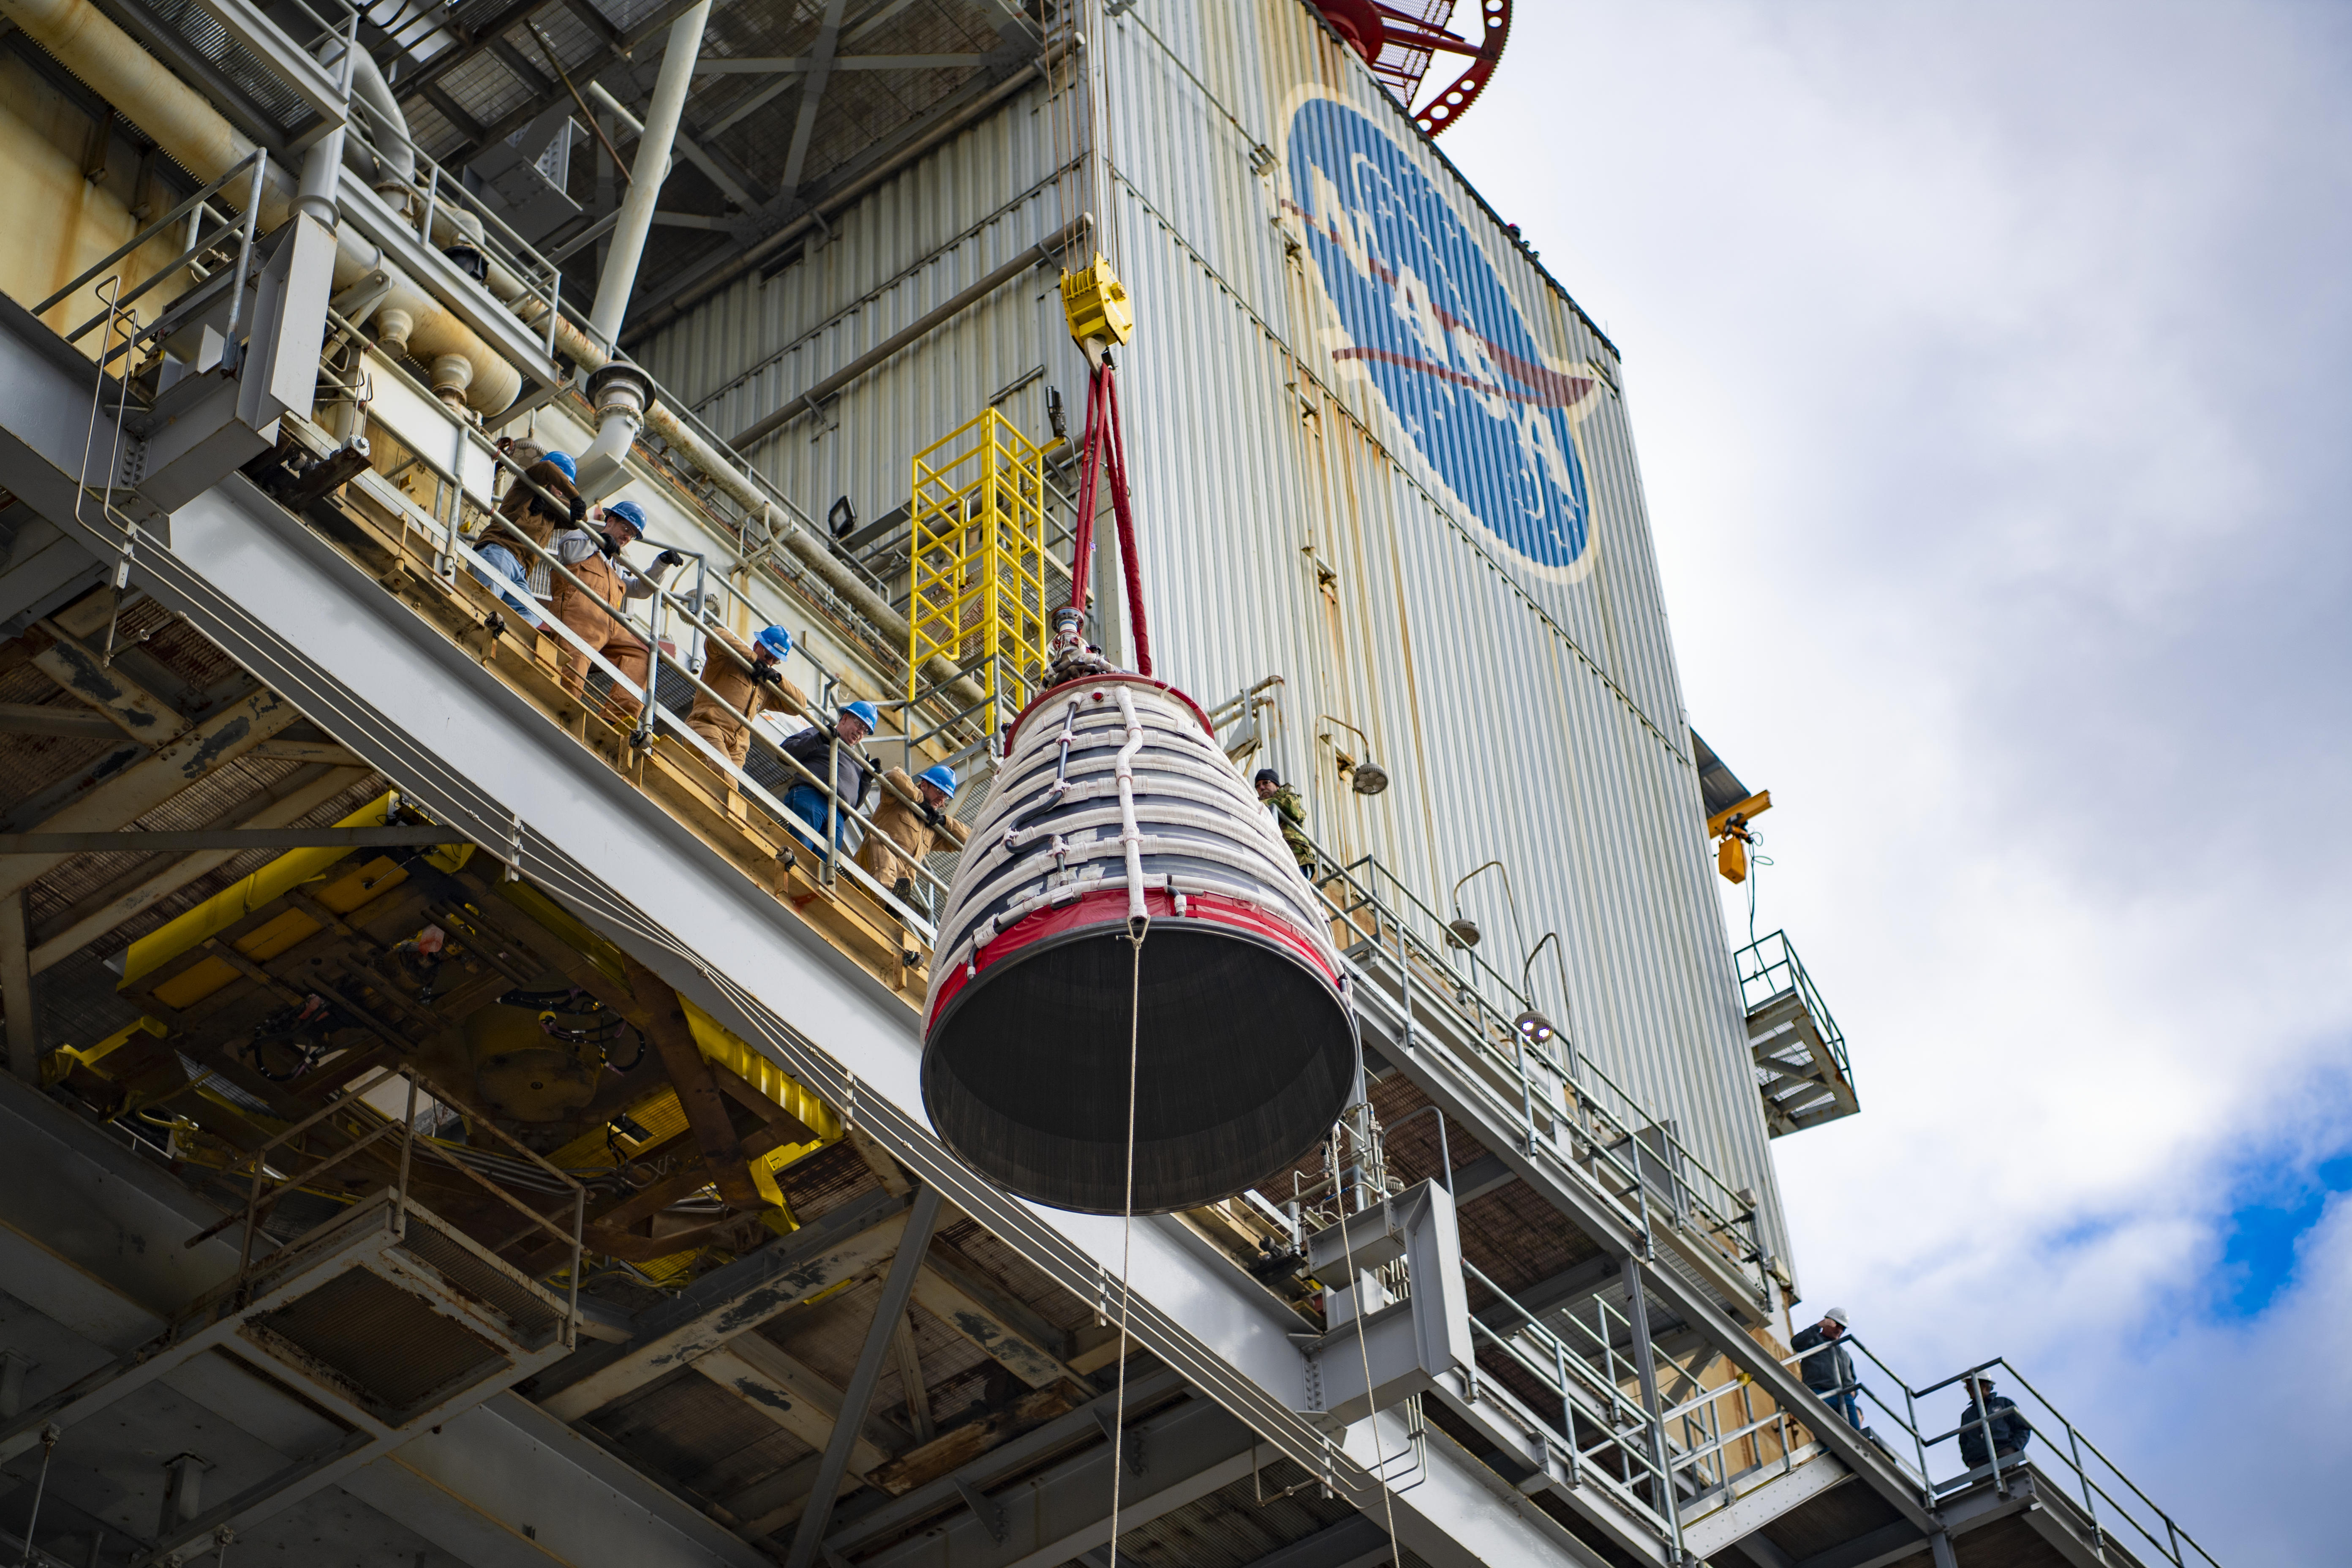 A new RS-25 engine production nozzle is lifted on the Fred Haise Test Stand